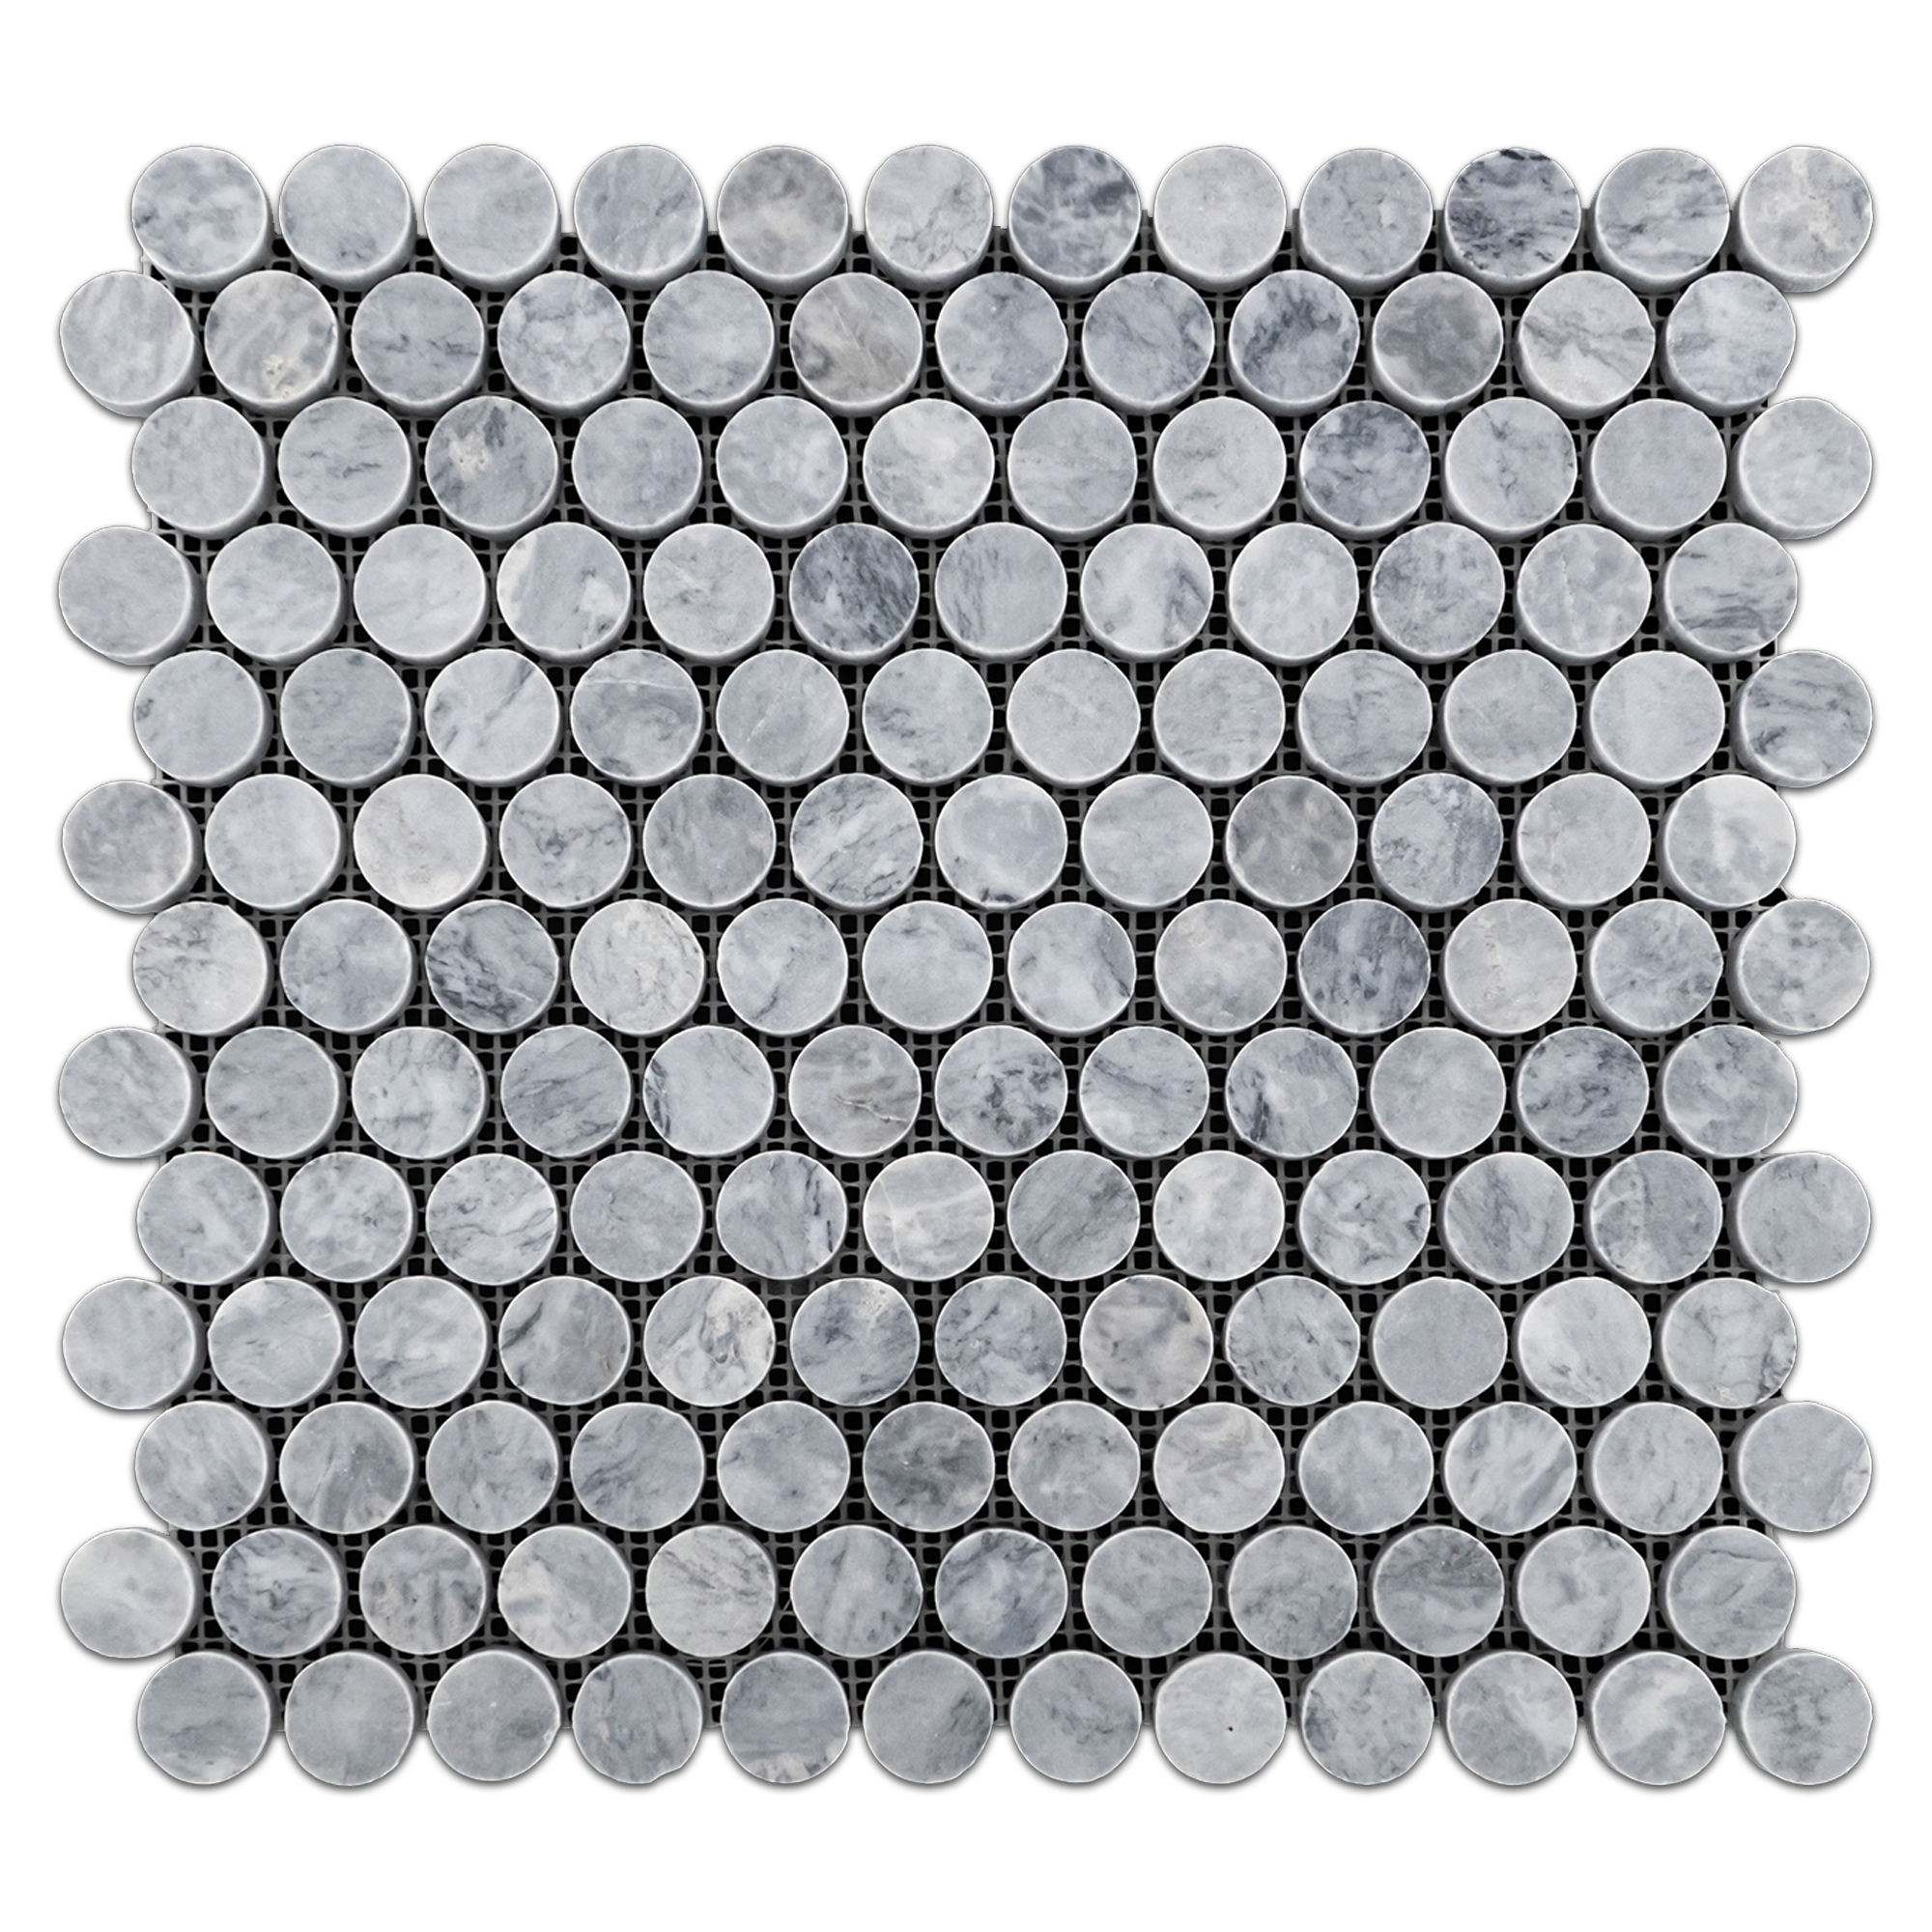 Elon Pacific Gray Marble 1 Penny Rounds Field Mosaic 11.5625x12.875x0.375 Polished SM1009P Surface Group International Product